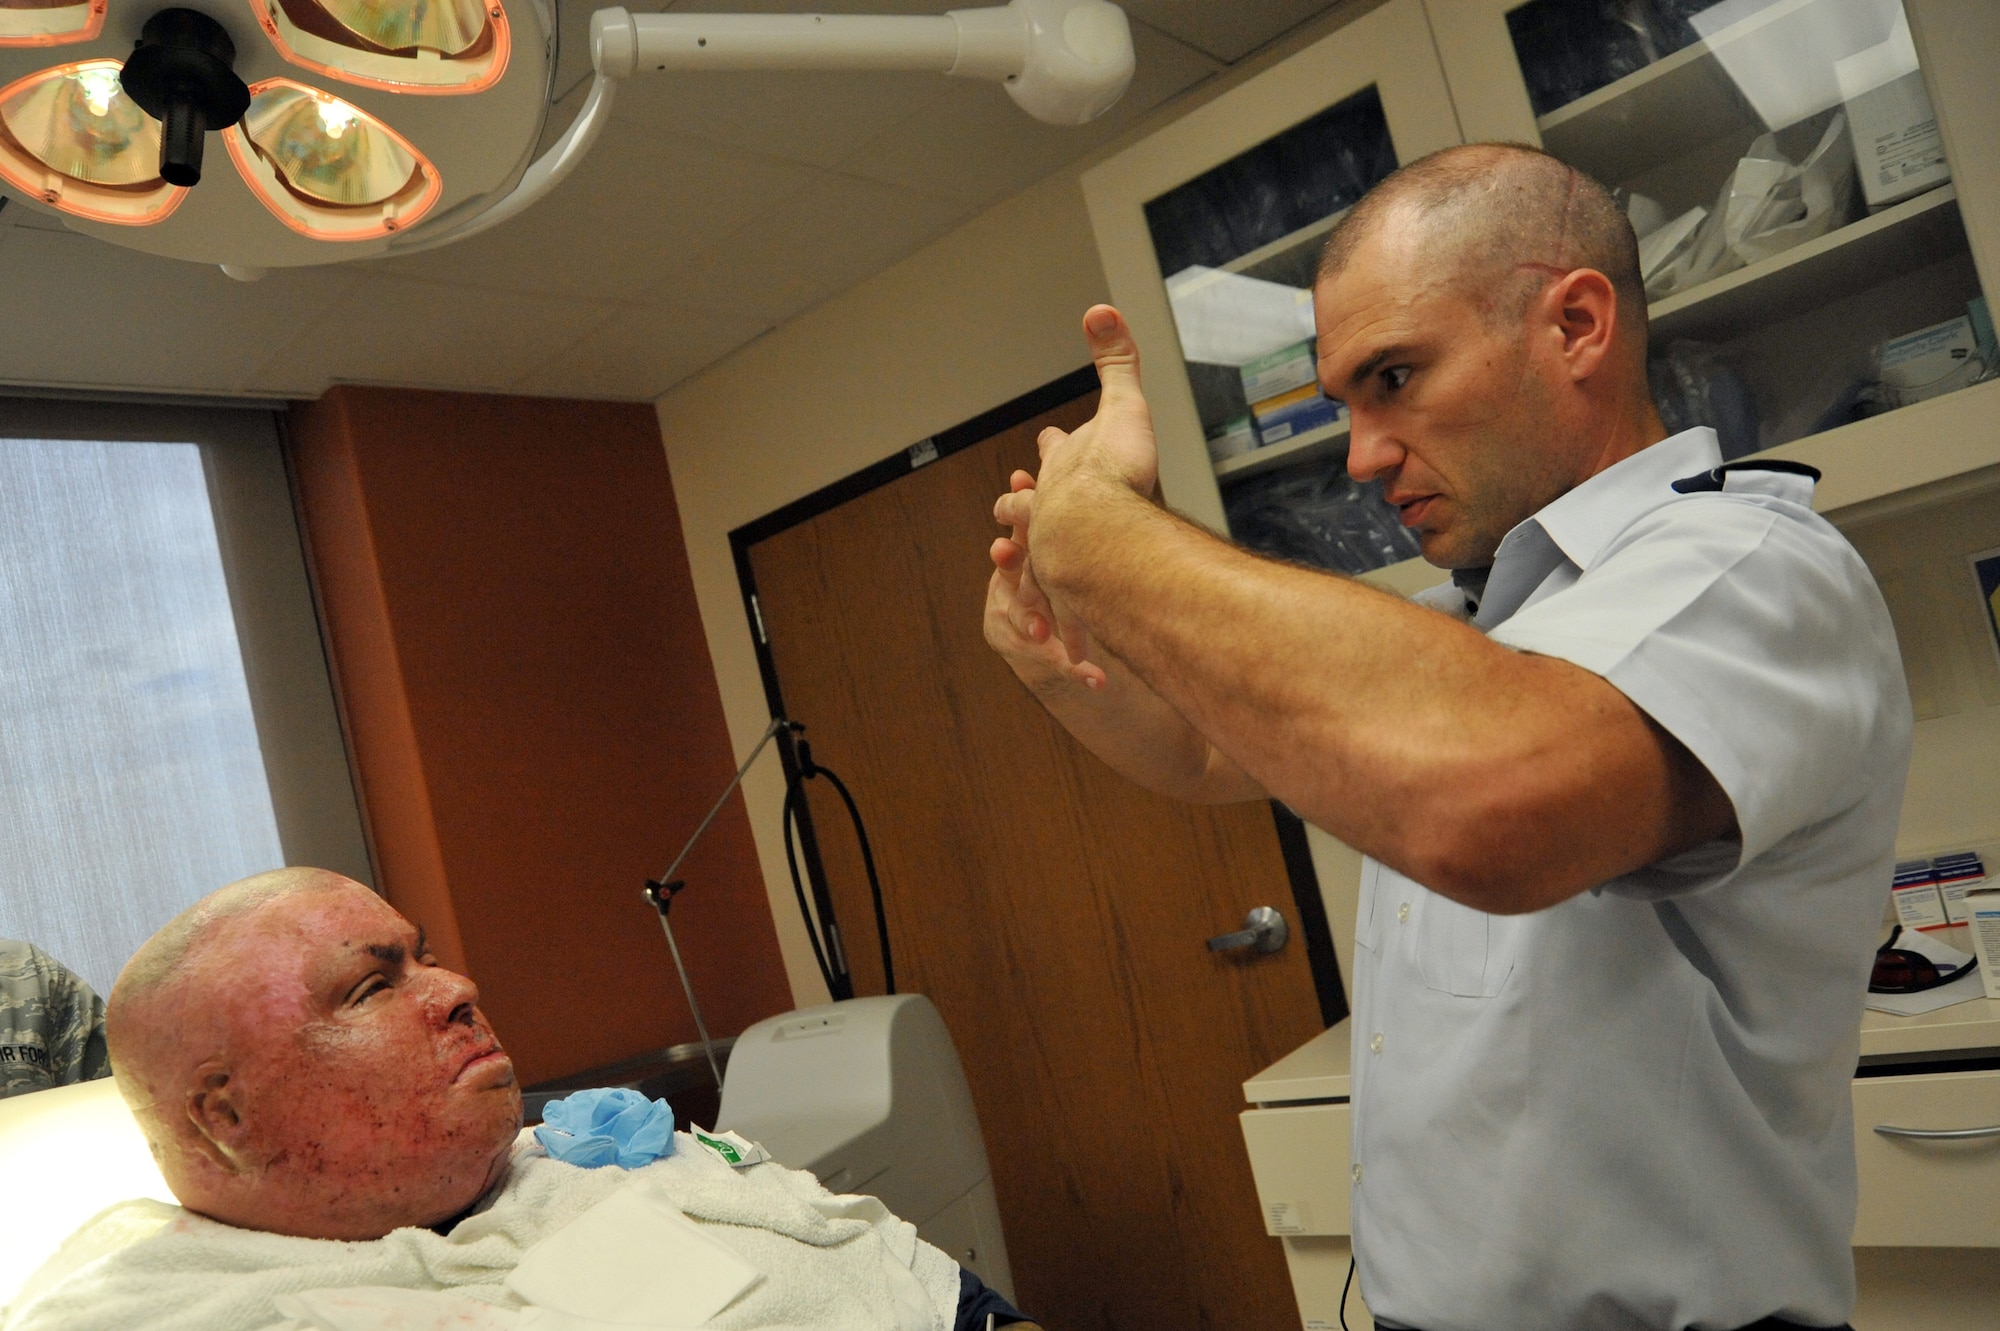 Lt. Col. Chad Hivnor explains the effects of the new fractional laser to treat battle scars to Gabriel Alvarado during a medical appointment at Wilford Hall Ambulatory Surgical Center, San Antonio, Texas, July 9, 2012. This technology gives wounded warriors the opportunity to gain a better range of motion. (U.S. Air Force photo/Desiree N. Palacios)